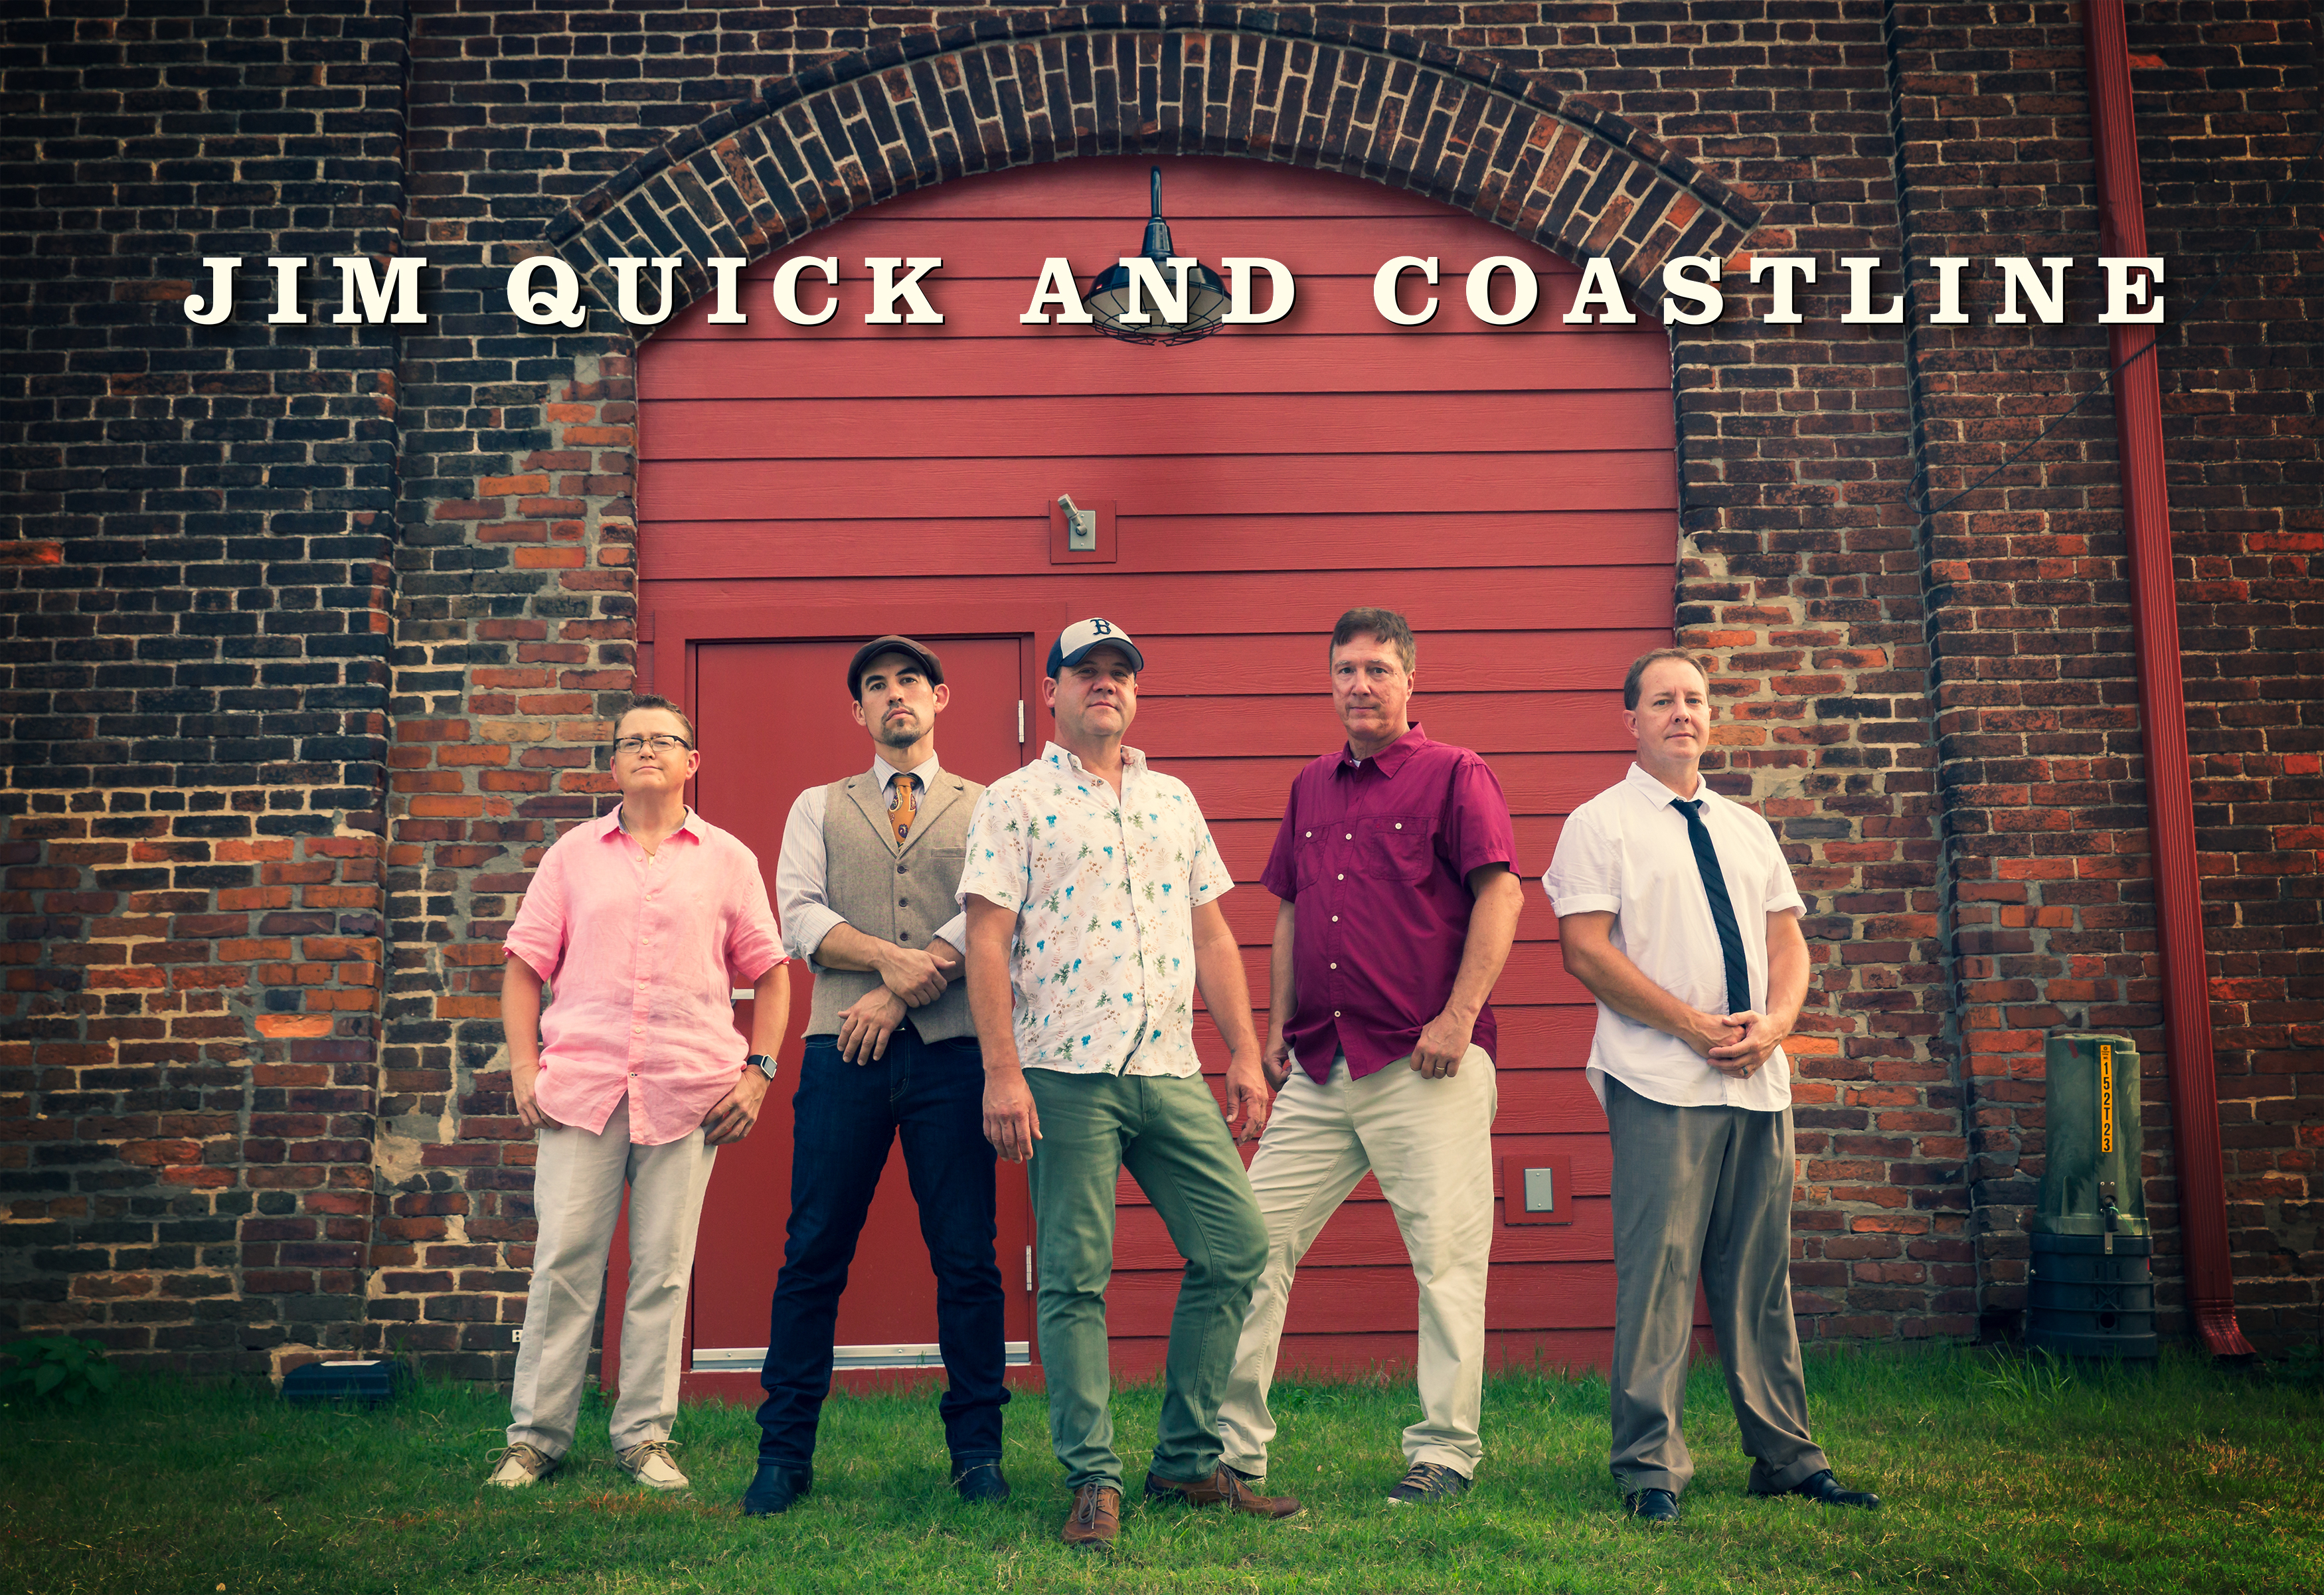 Jim Quick and Coastline band members pose for a photo